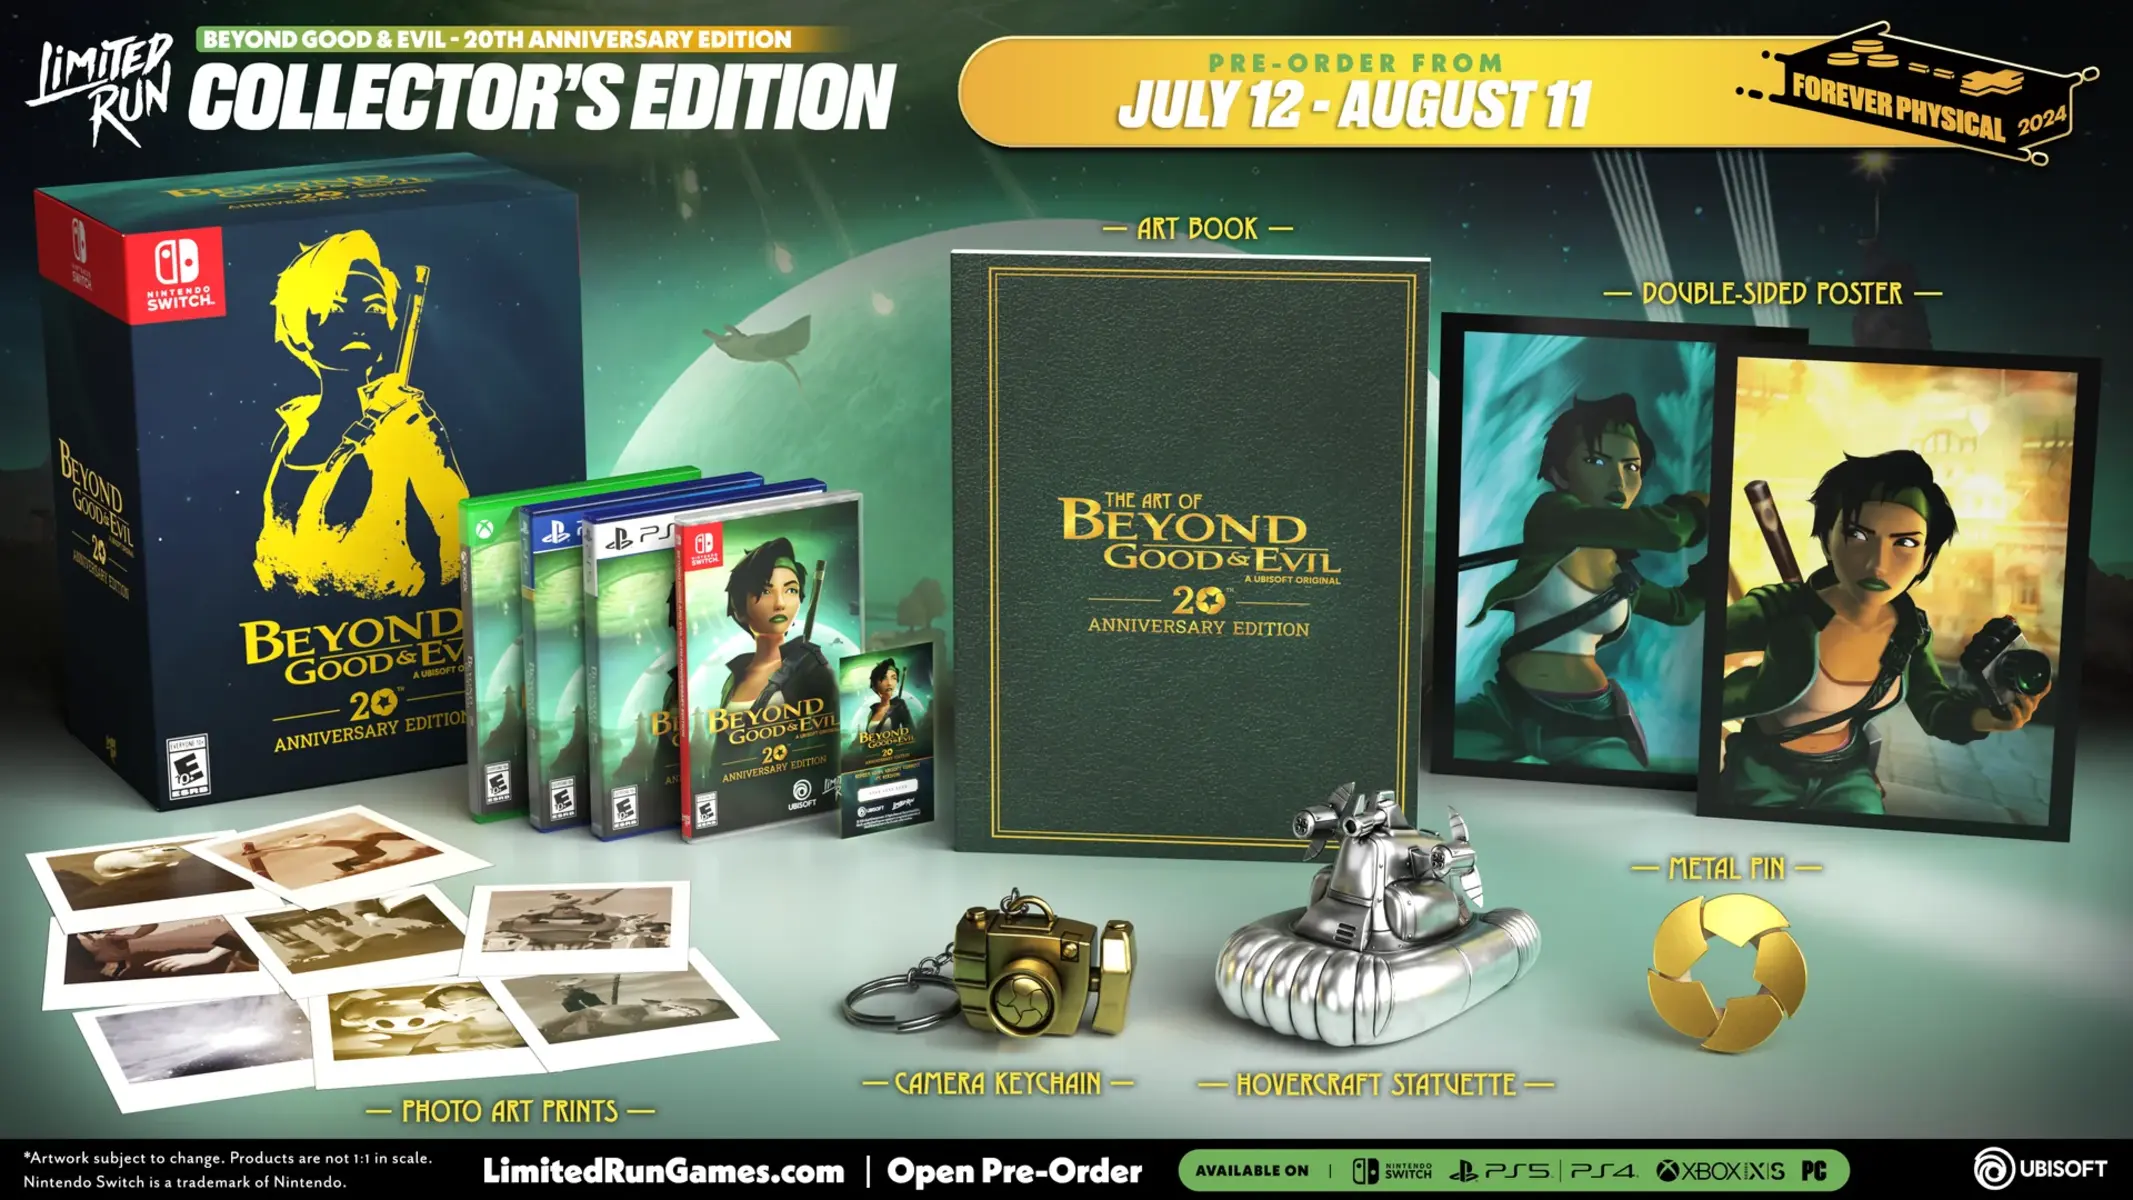 Beyond Good and Evil 20th Anniversary Edition Collector's Edition